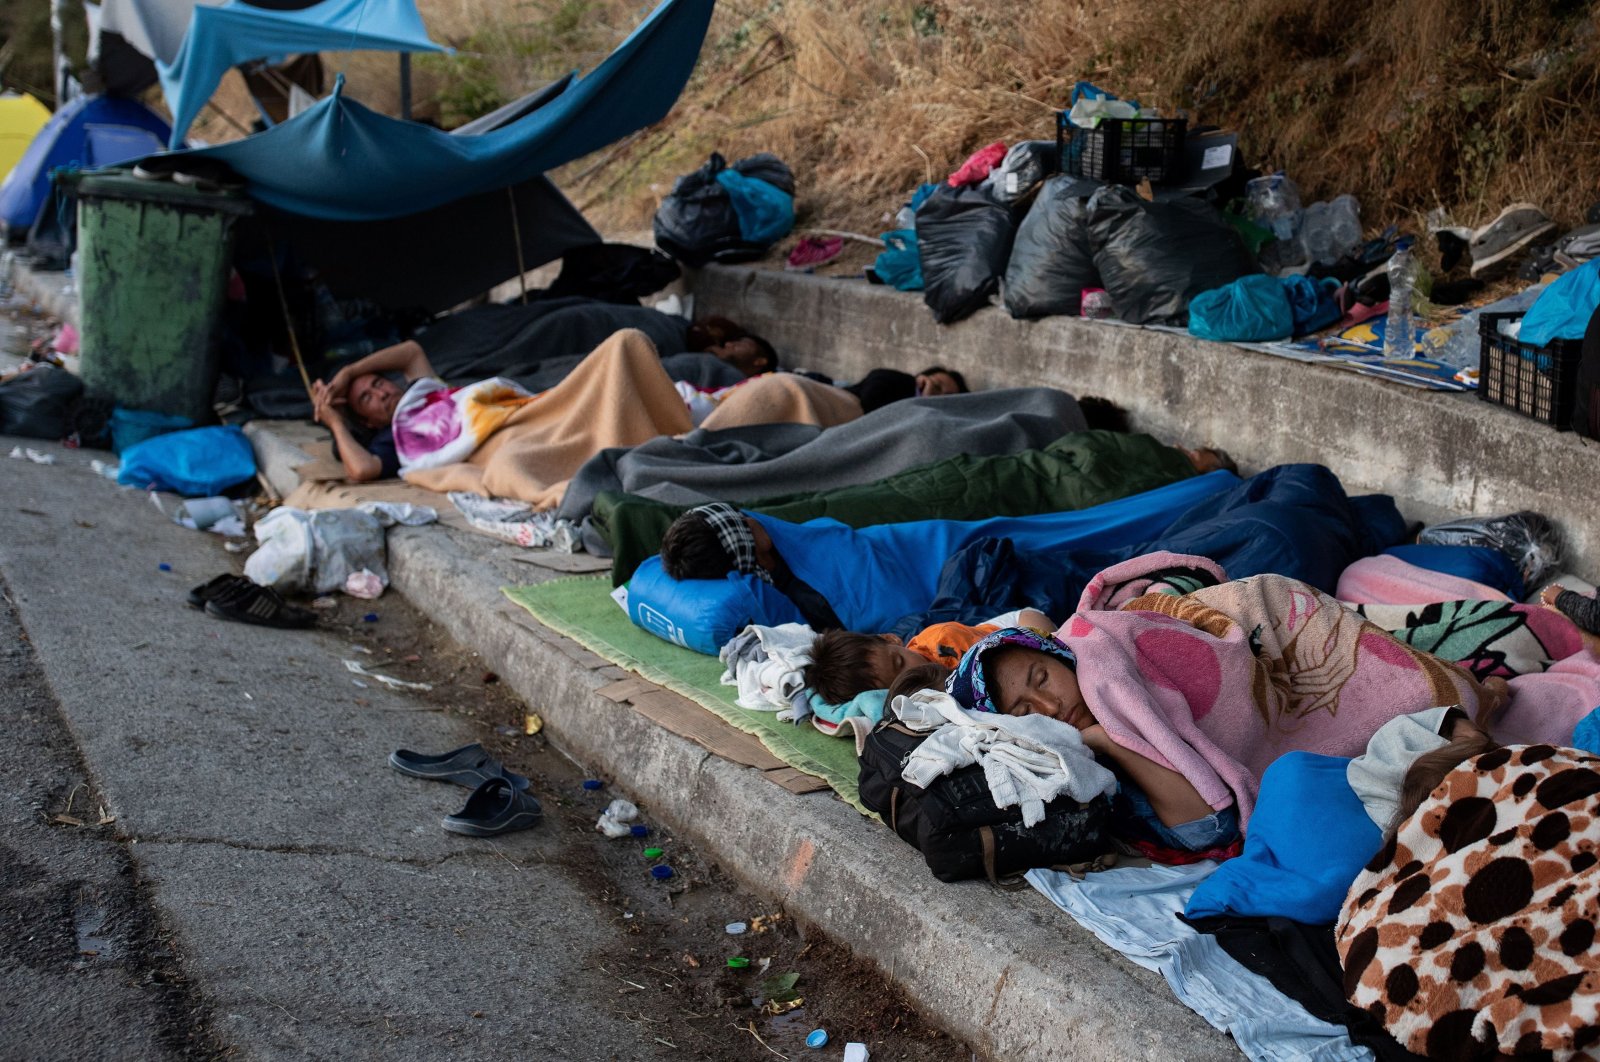 Refugees and migrants from the destroyed Moria camp sleep on the side of a road, on the island of Lesbos, Greece, Sep.13, 2020. (Reuters Photo)